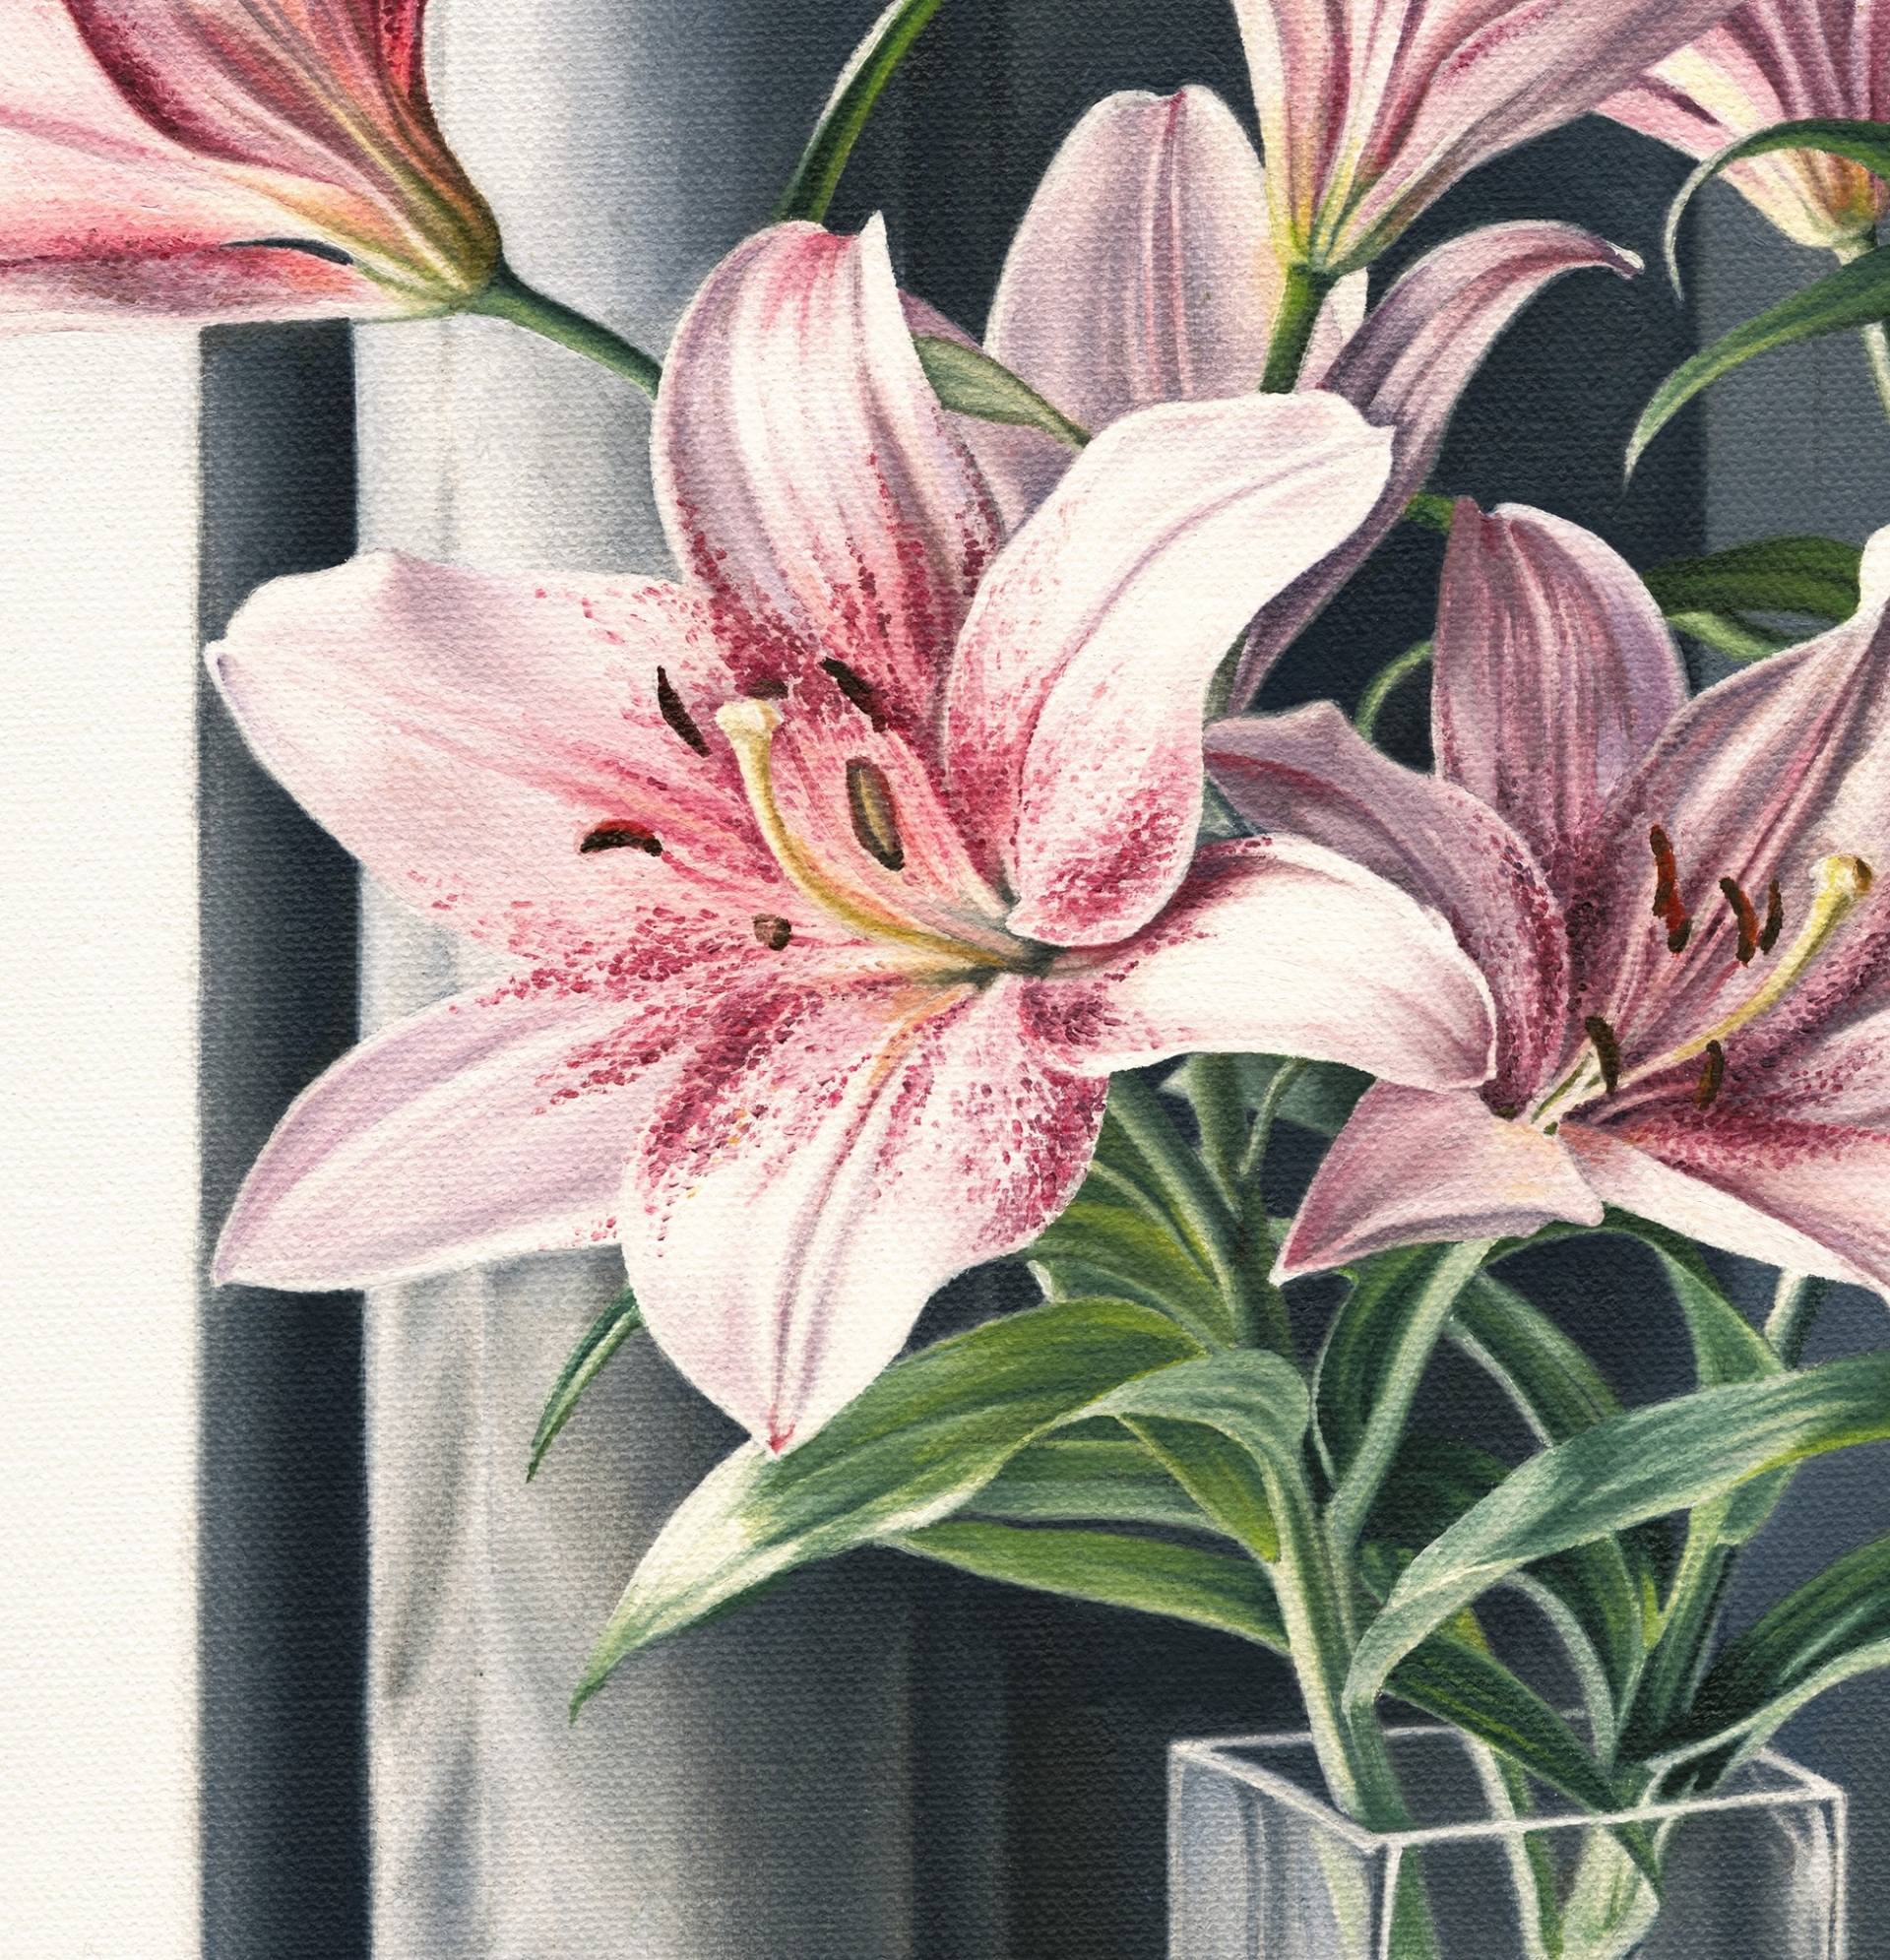 Saatchi Art: PINK LILIES Painting by Natalia Beccher